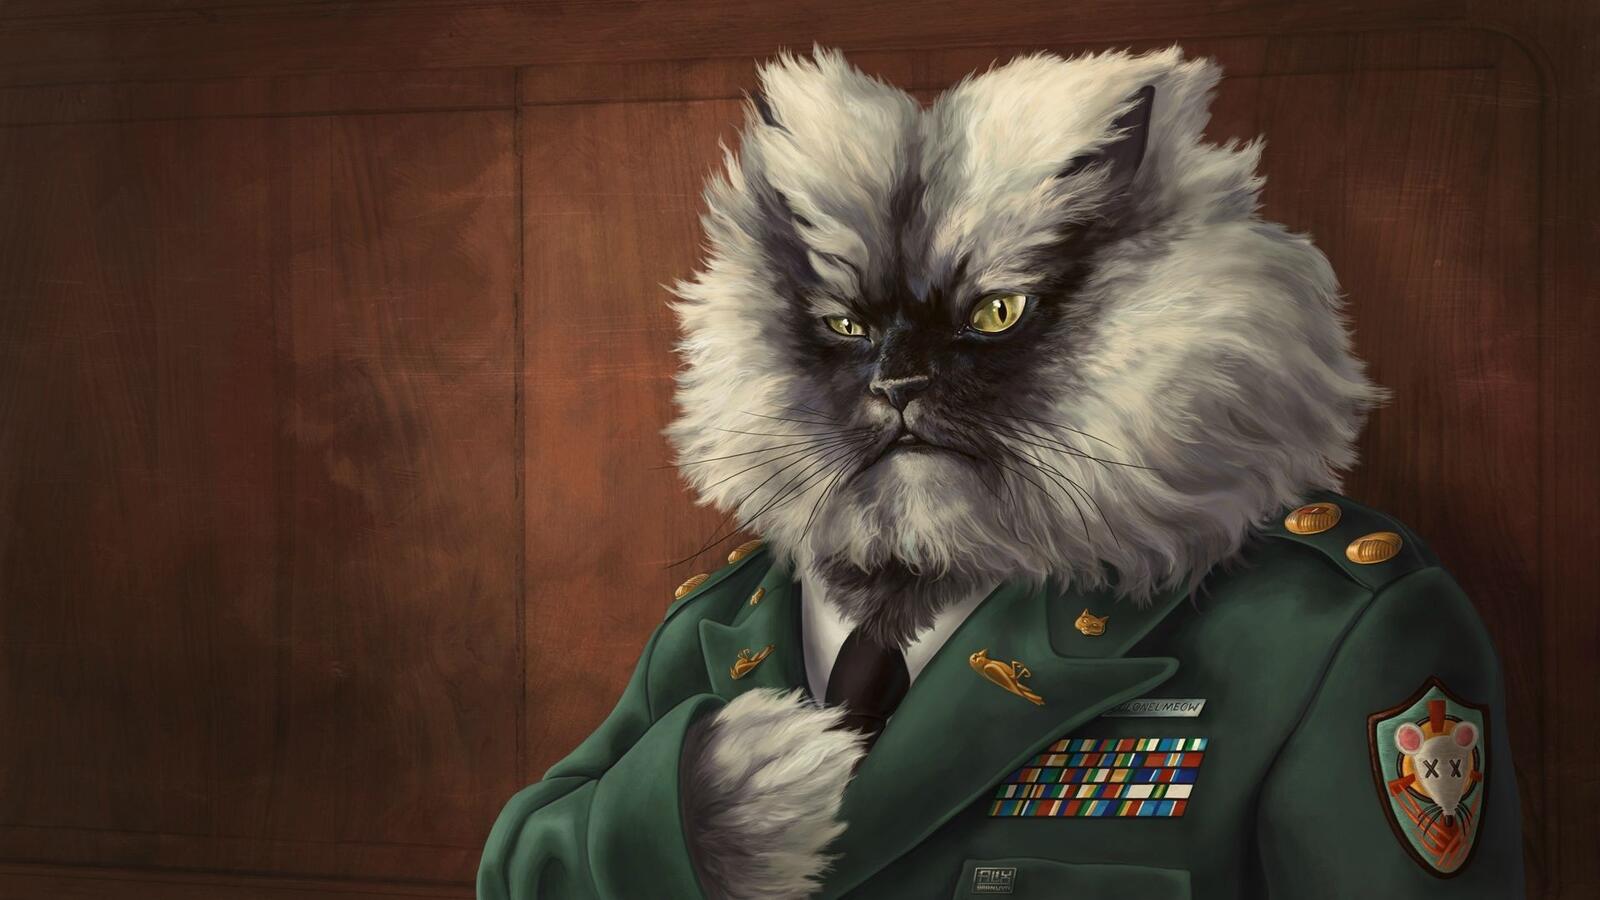 Free photo A cat in a military coat with orders.